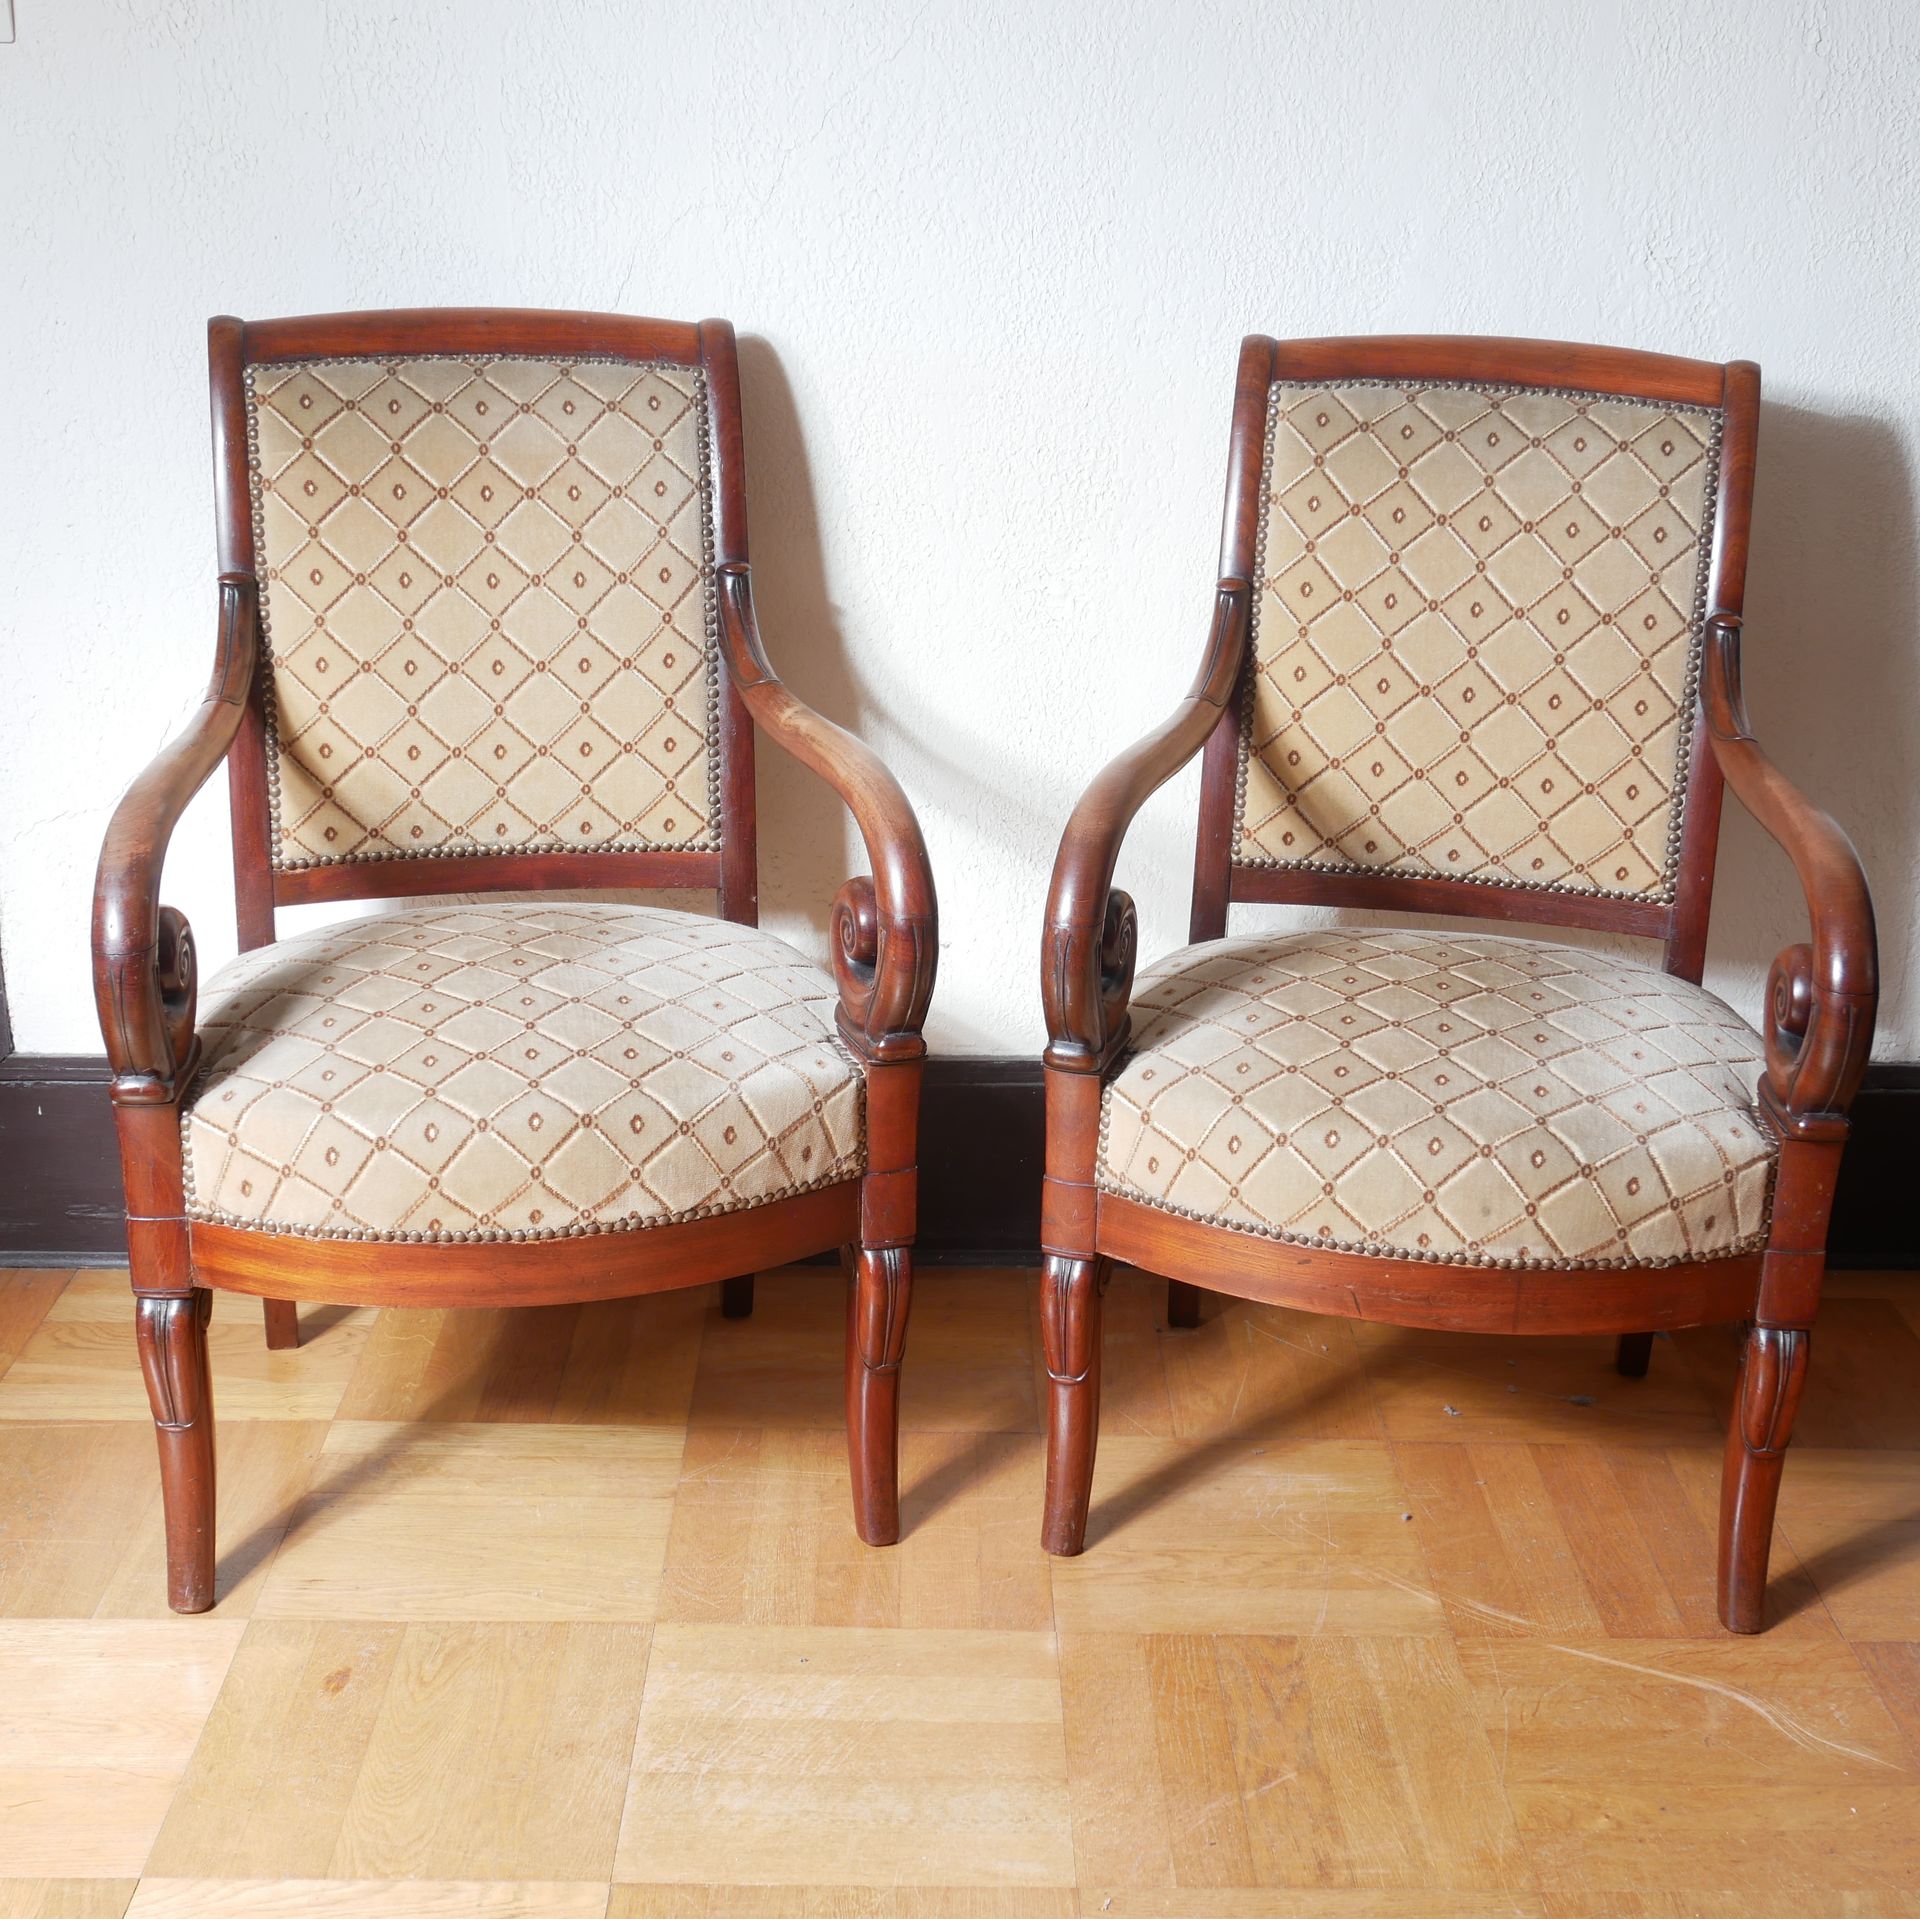 Null Pair of armchairs in natural wood, armrests with scroll, 19th c. (wear)